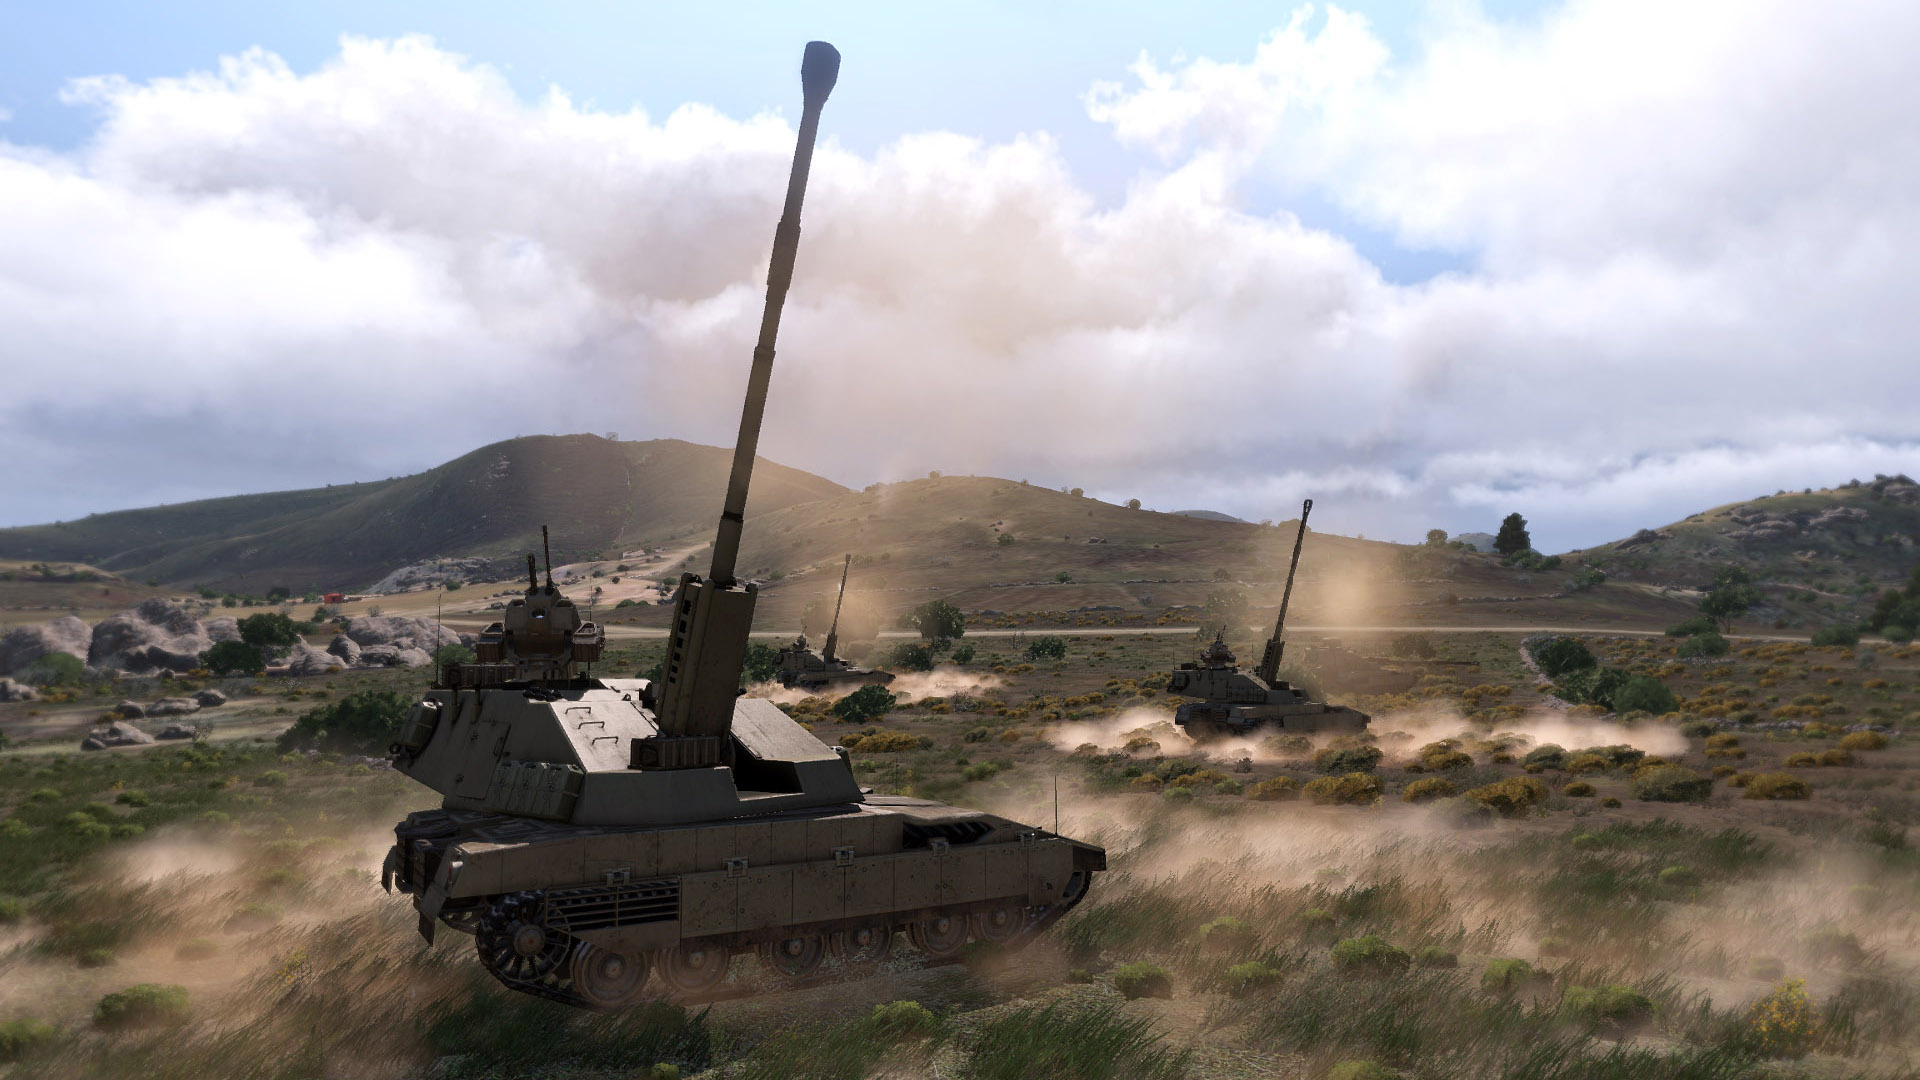 Best tank games: Arma 3. Image shows tanks rising their trunks triumphantly.